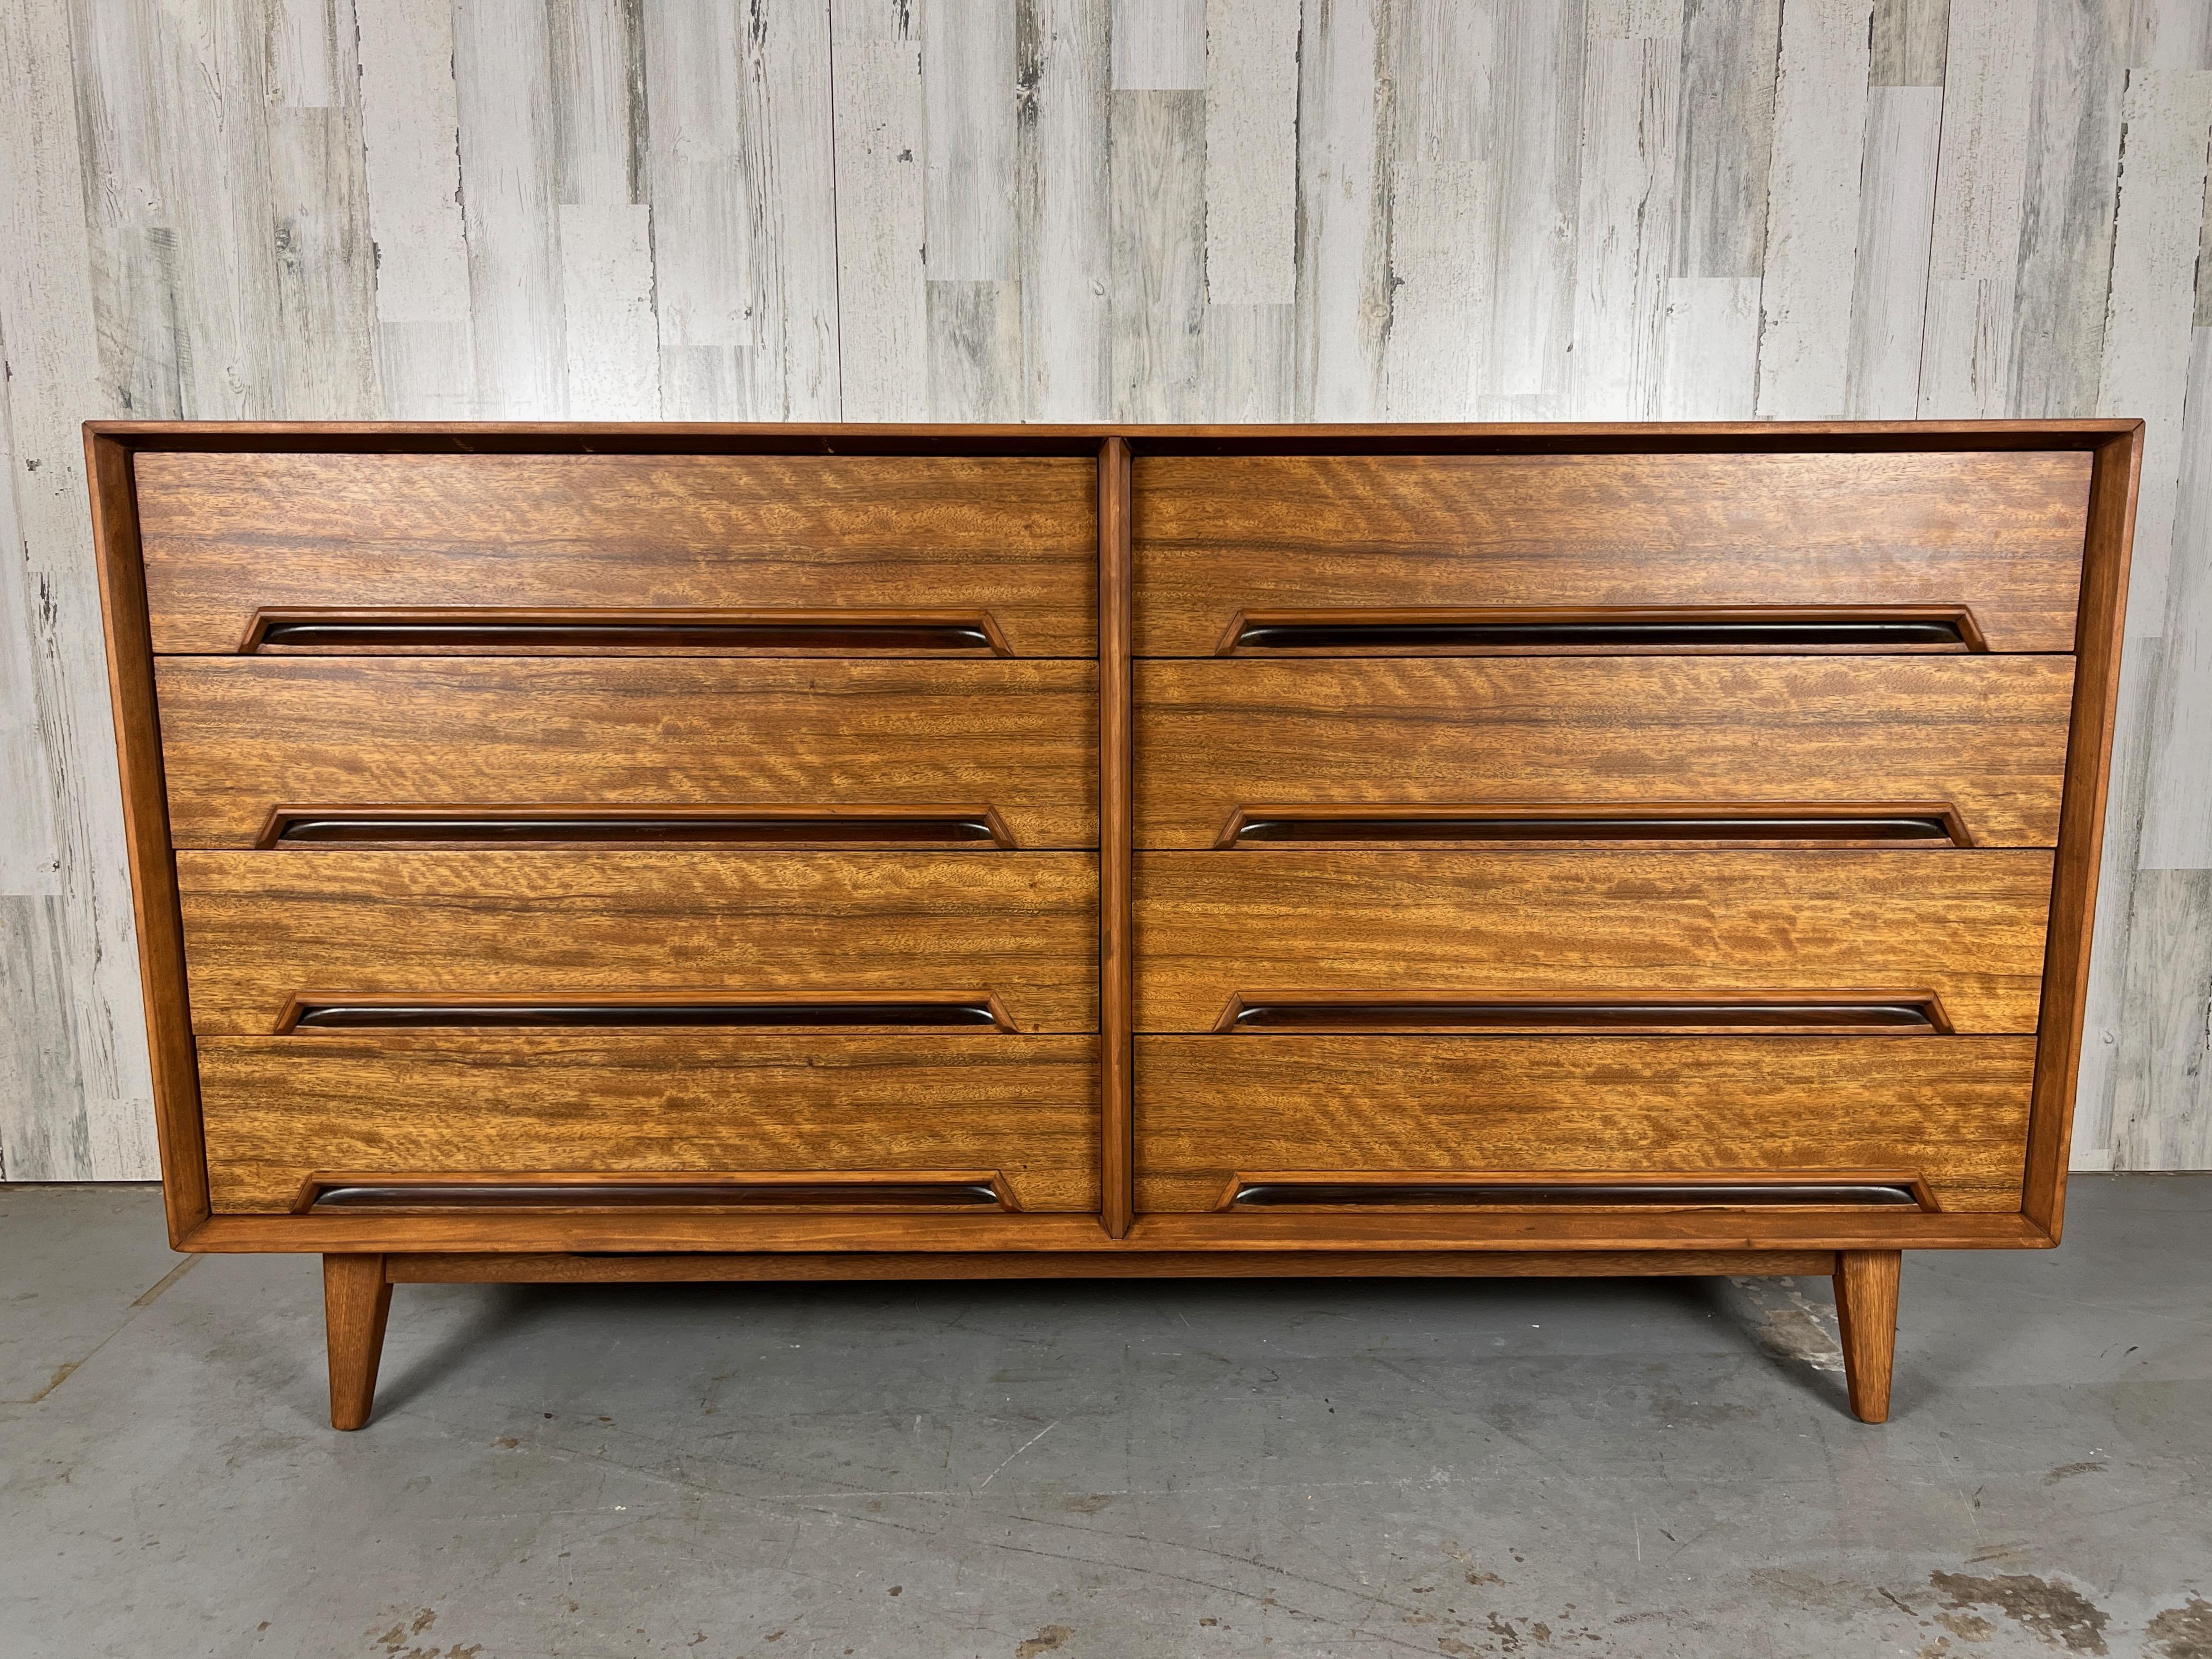 Mahogany eight drawer dresser designed by Milo Baughman for Drexel.
The legs pictured are vintage but not the original.